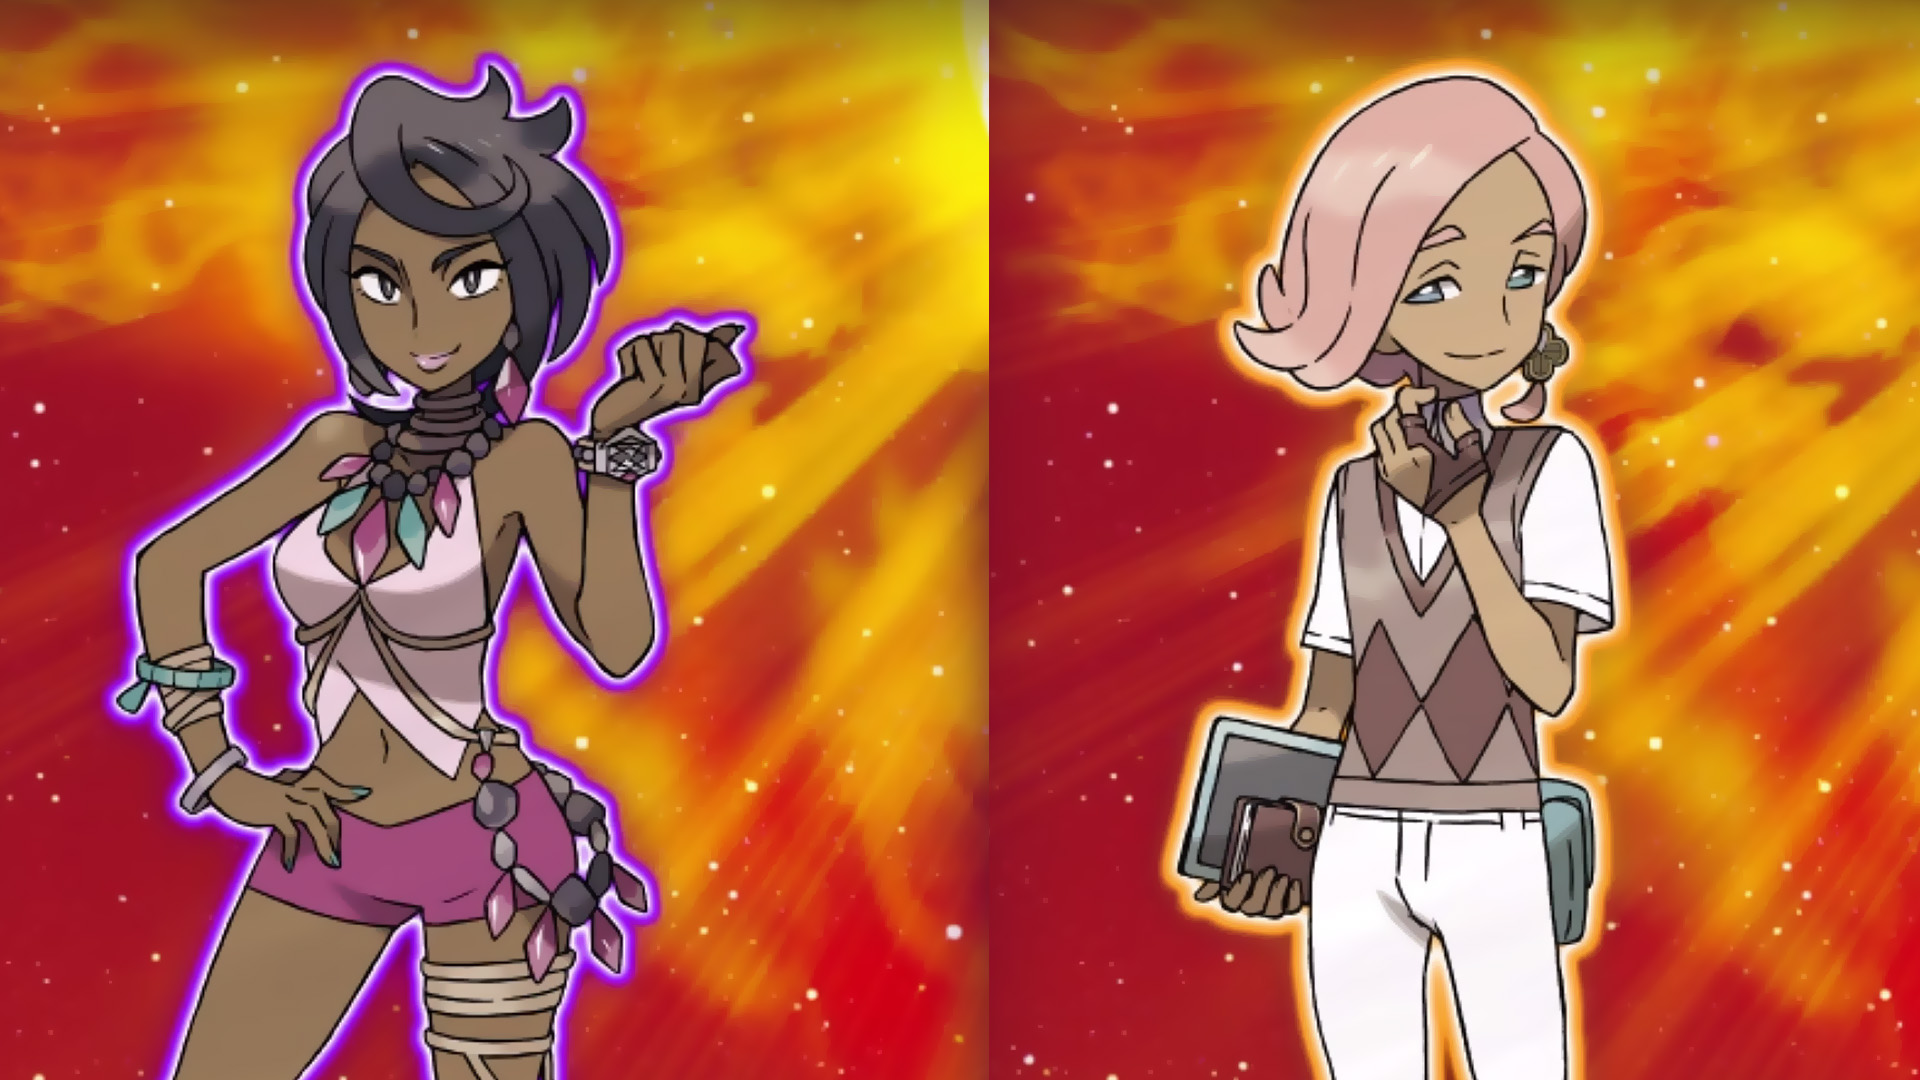 Two new trainers from the Alola region revealed: Olivia and Ilima.